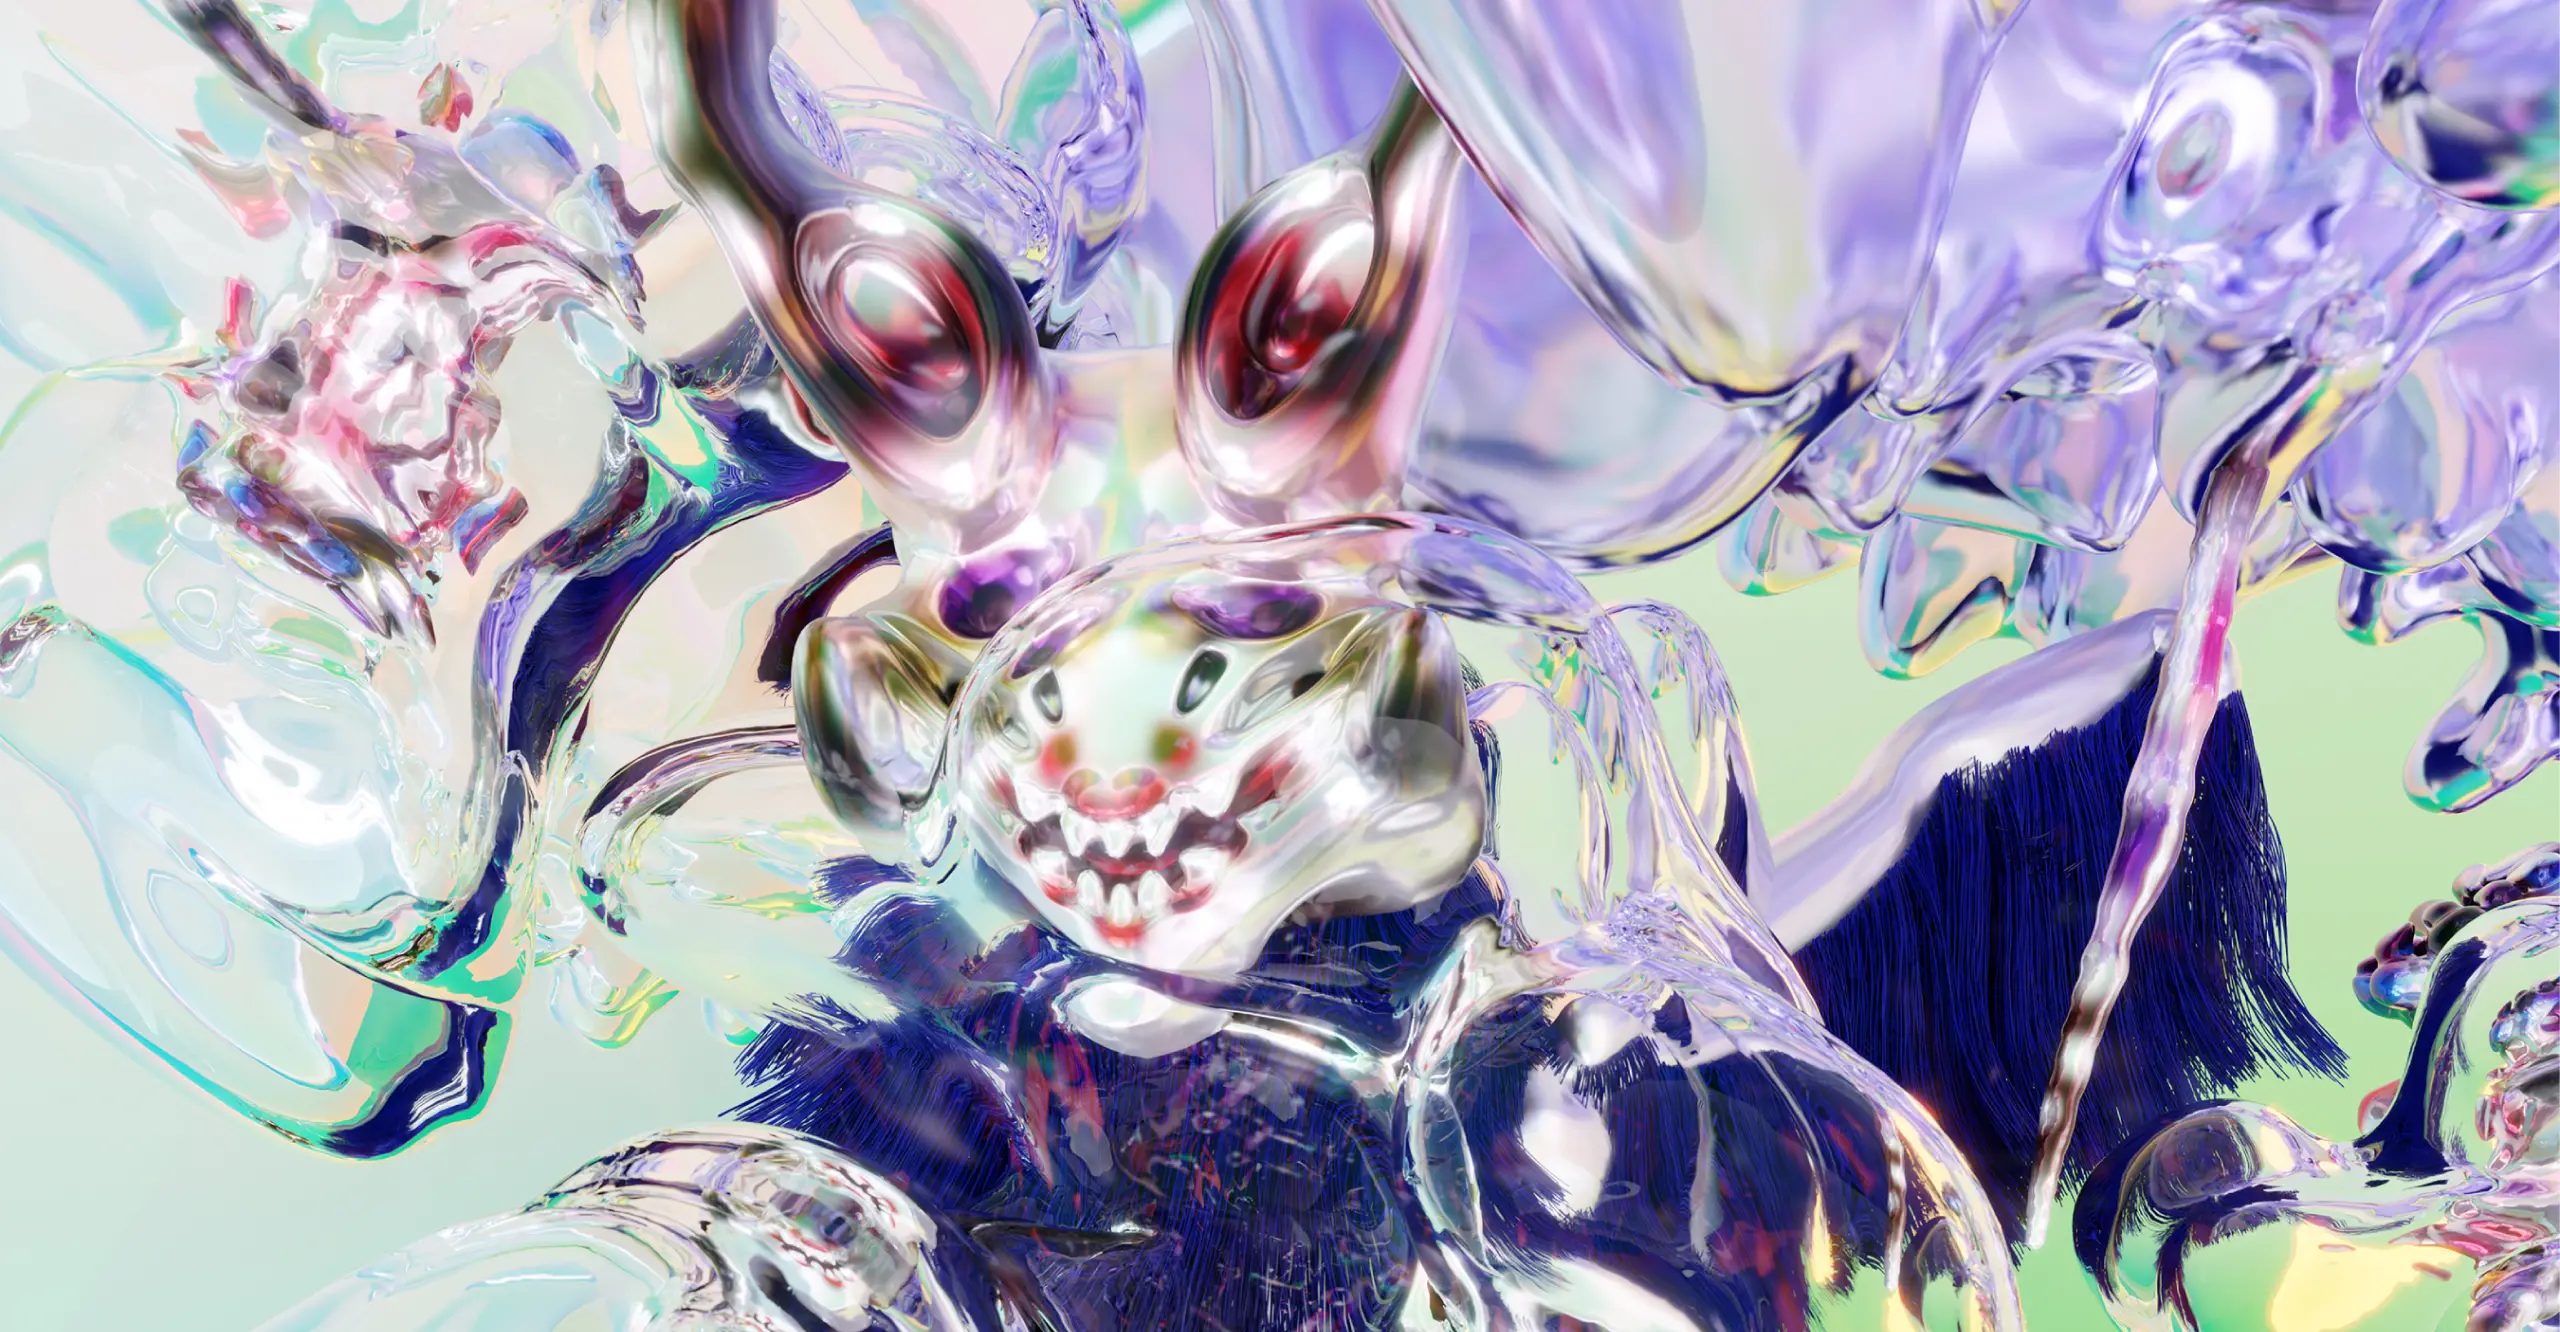 A highly computer generated image of the top of an otherworldly figure, covered in reflective translucent materials